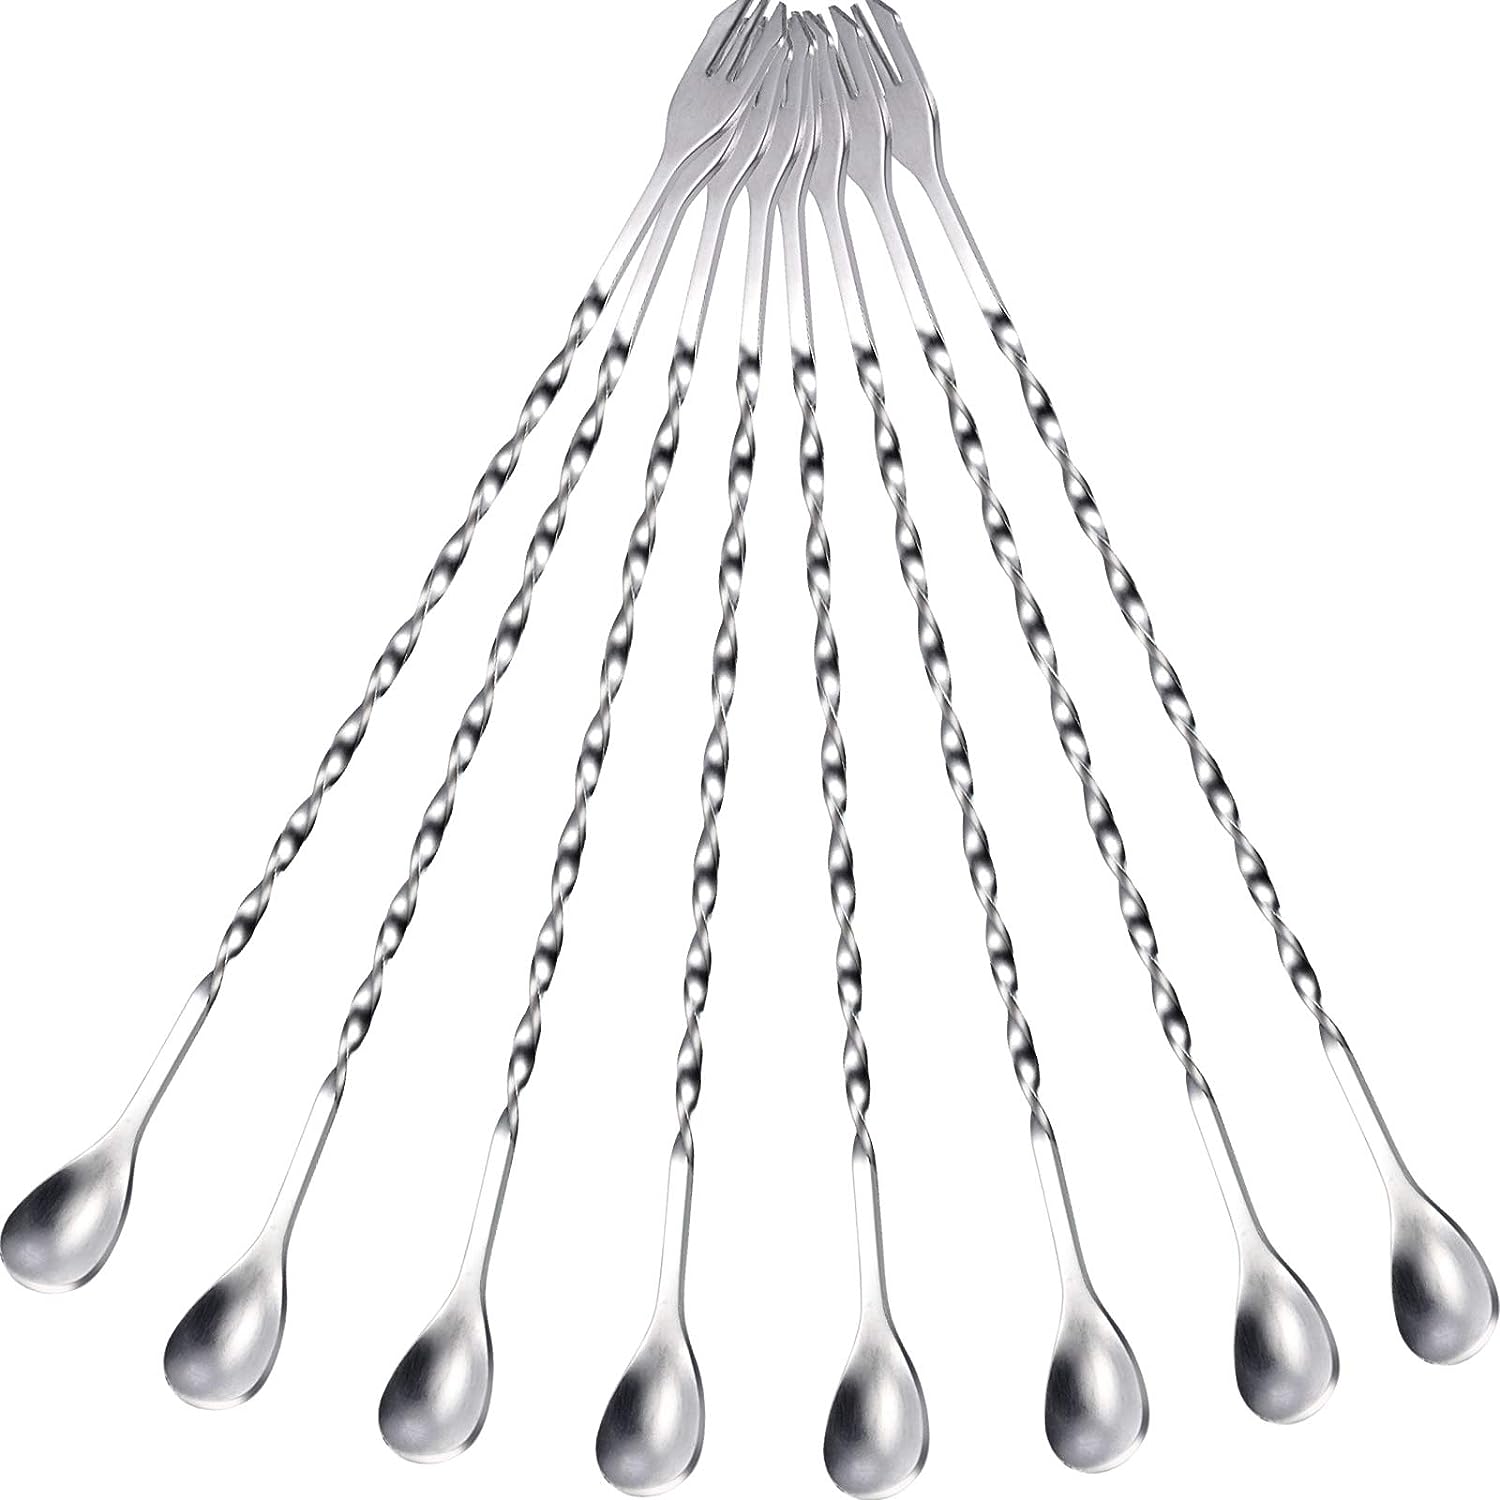 https://img.kwcdn.com/product/stainless-steel-spiral-pattern-cocktail-stirrers-spoons/d69d2f15w98k18-e12eea2c/open/2023-08-19/1692460546023-d3715863bfad46ac88e6ae5937759ab7-goods.jpeg